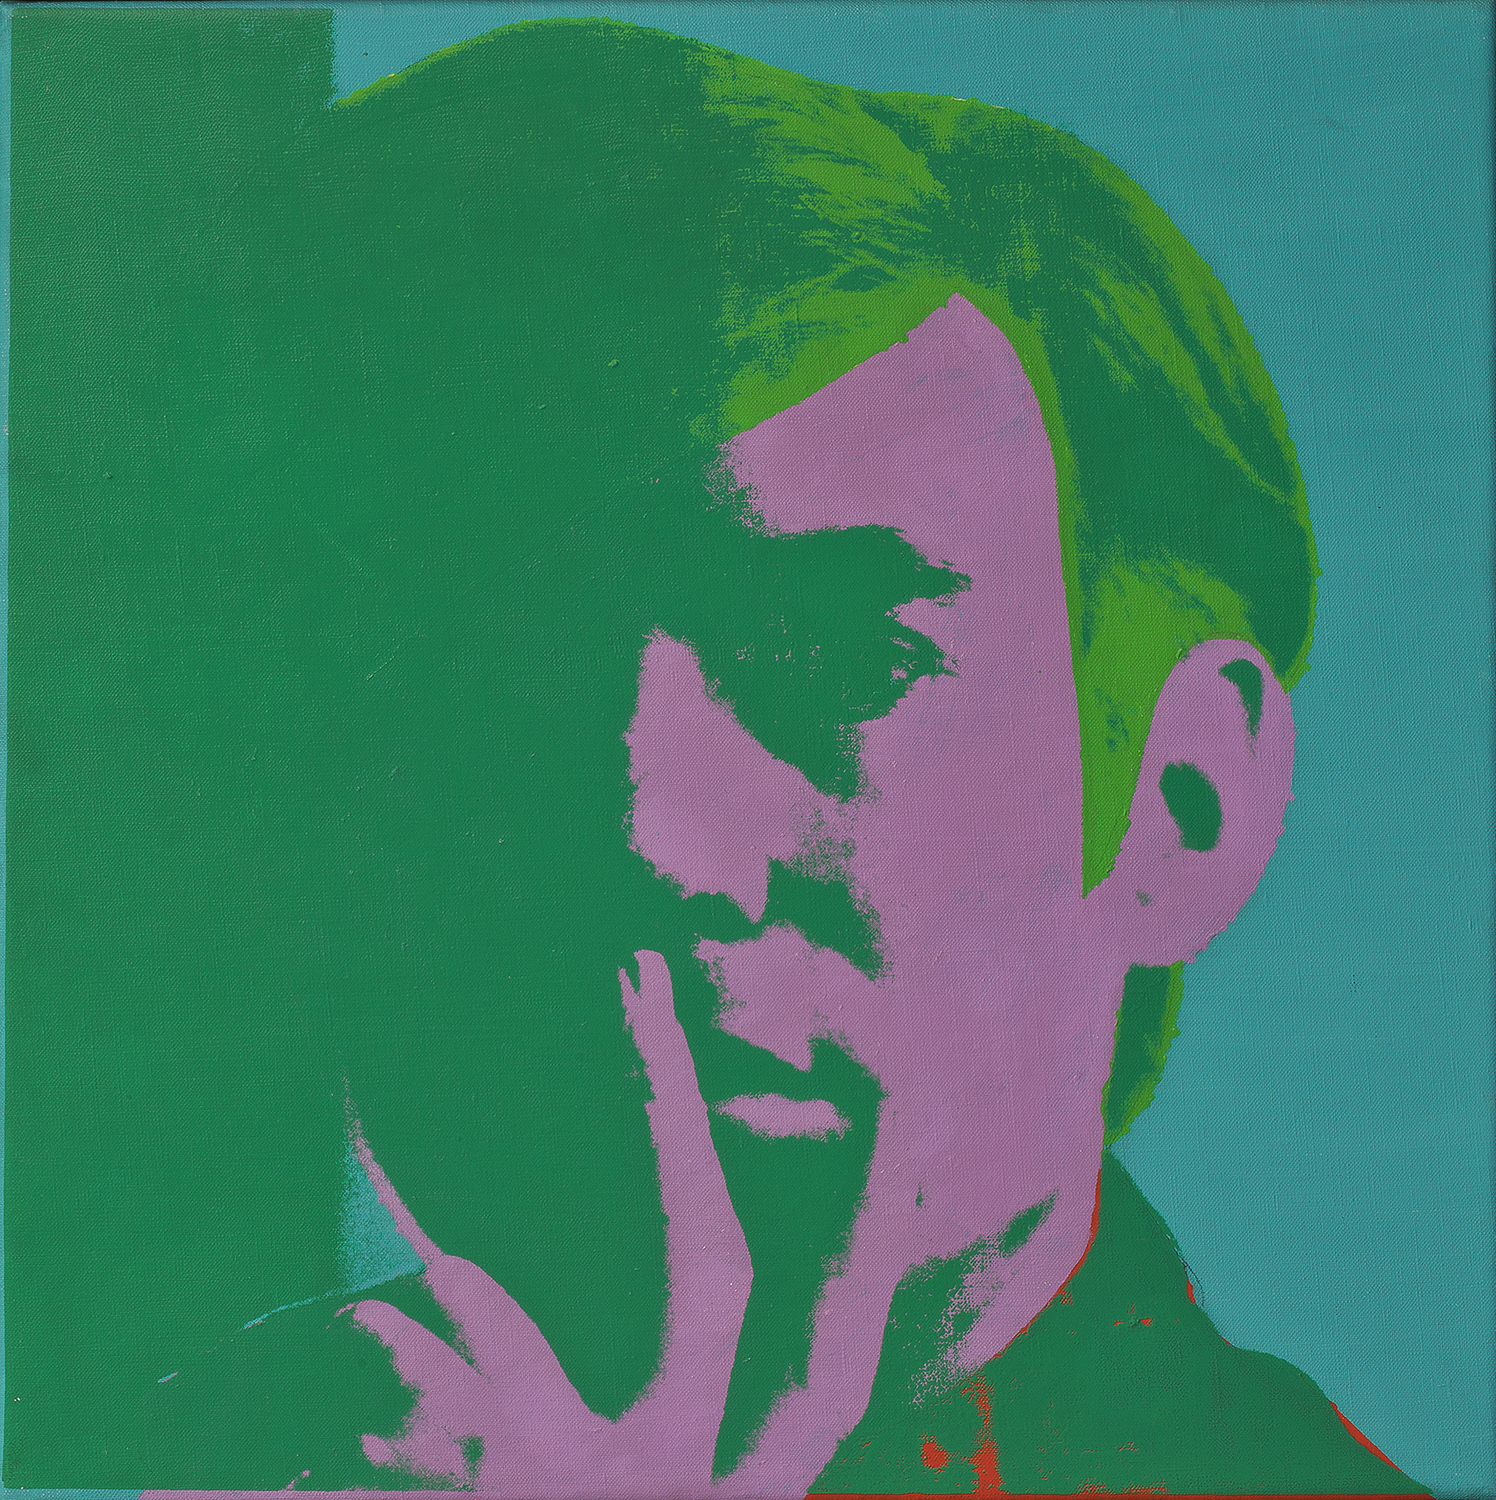 Andy Warhol. 'Self-Portrait,' 1966. The Art Institute of Chicago, Gift of Edlis/Neeson Collection.